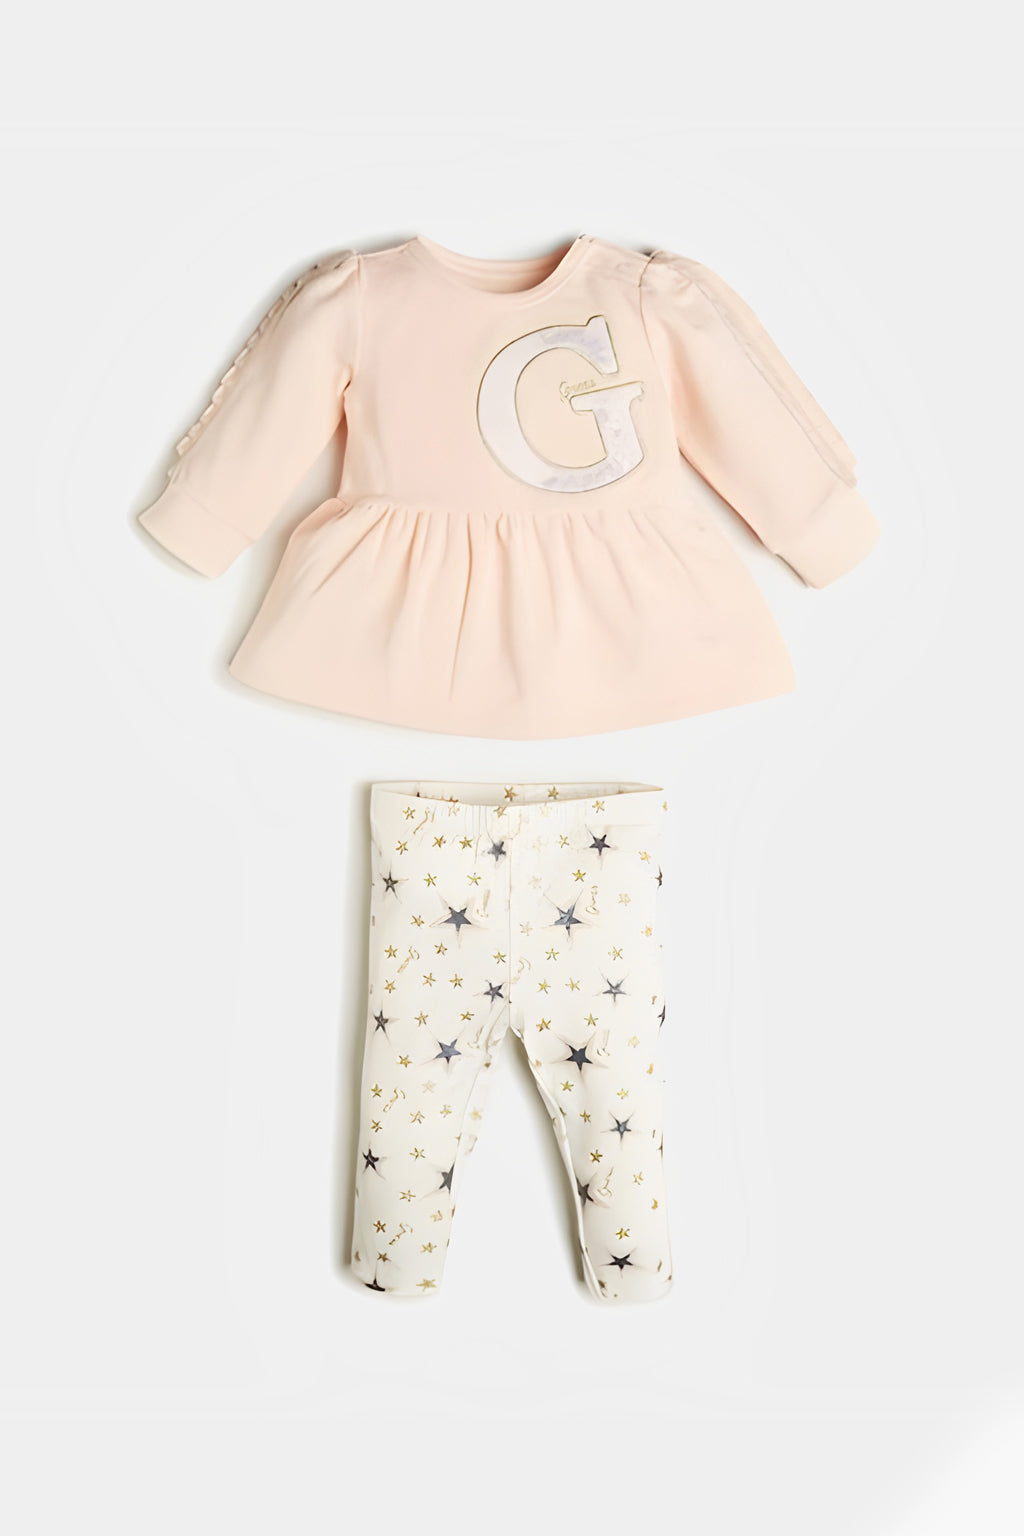 Guess - Skirts and Pants for Infants